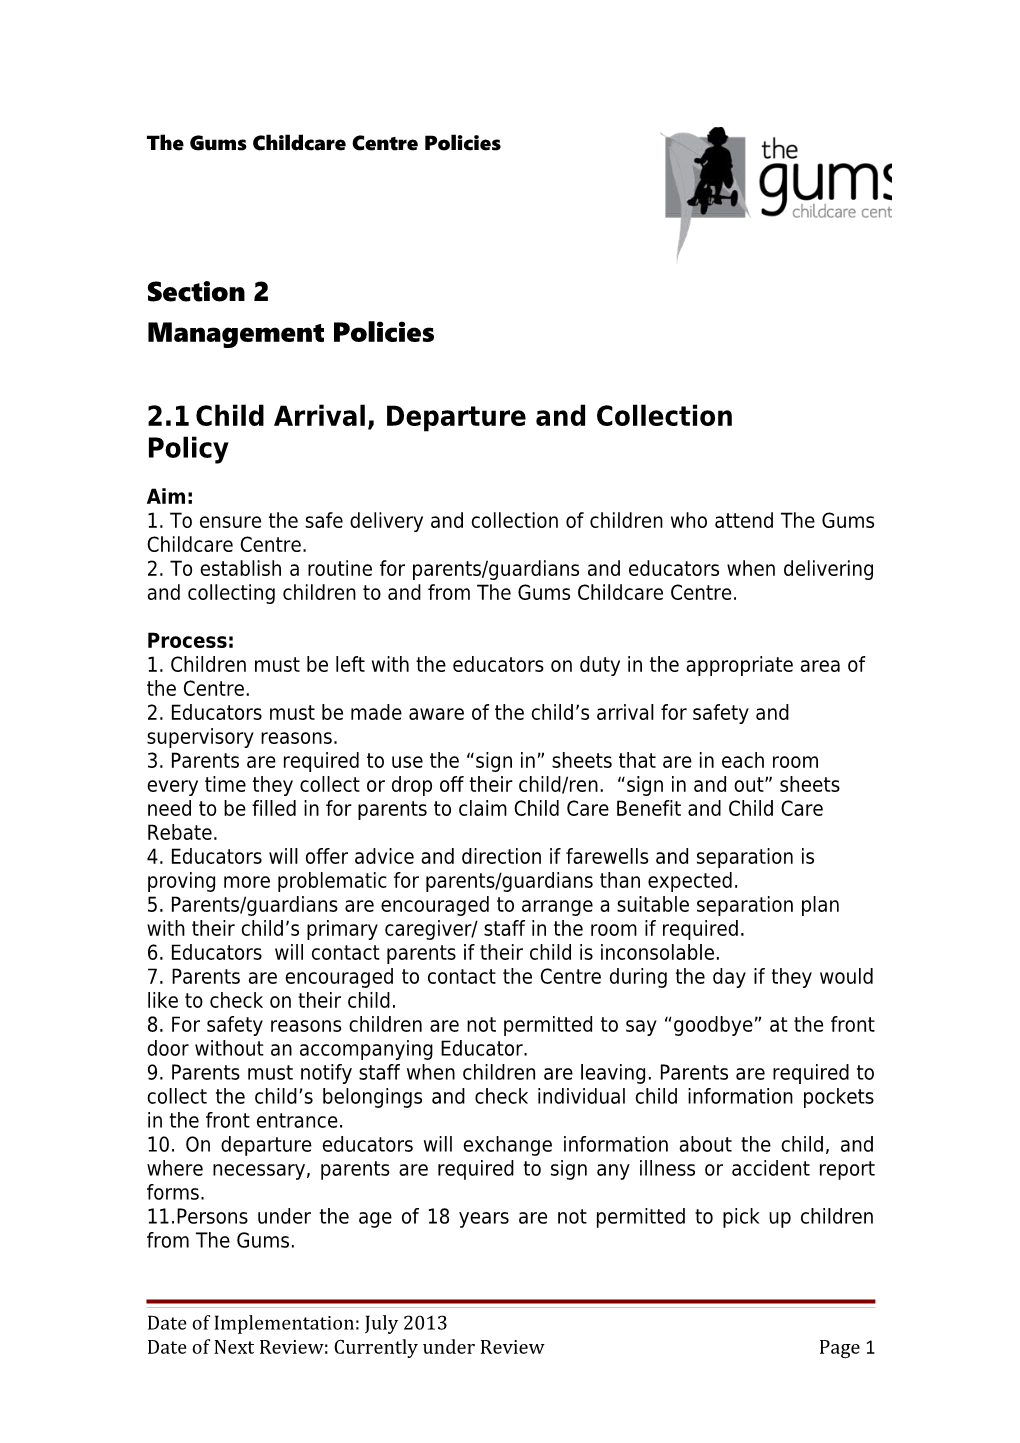 2.1Child Arrival, Departure and Collectionpolicy